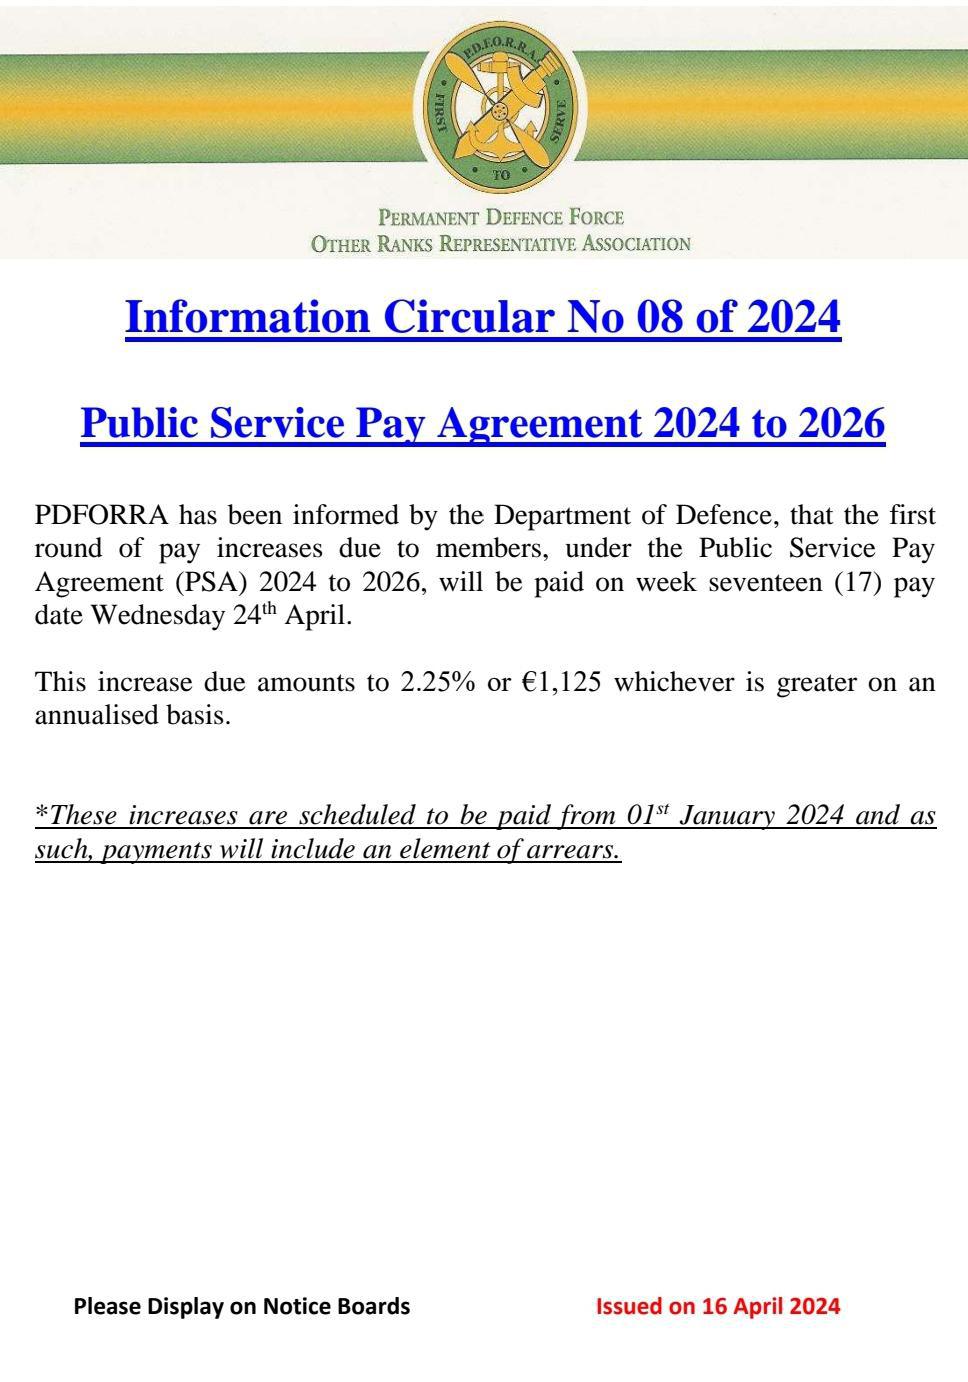 Information Circular No 08 of 24 - Public Service Pay Agreement 2024 to 2026